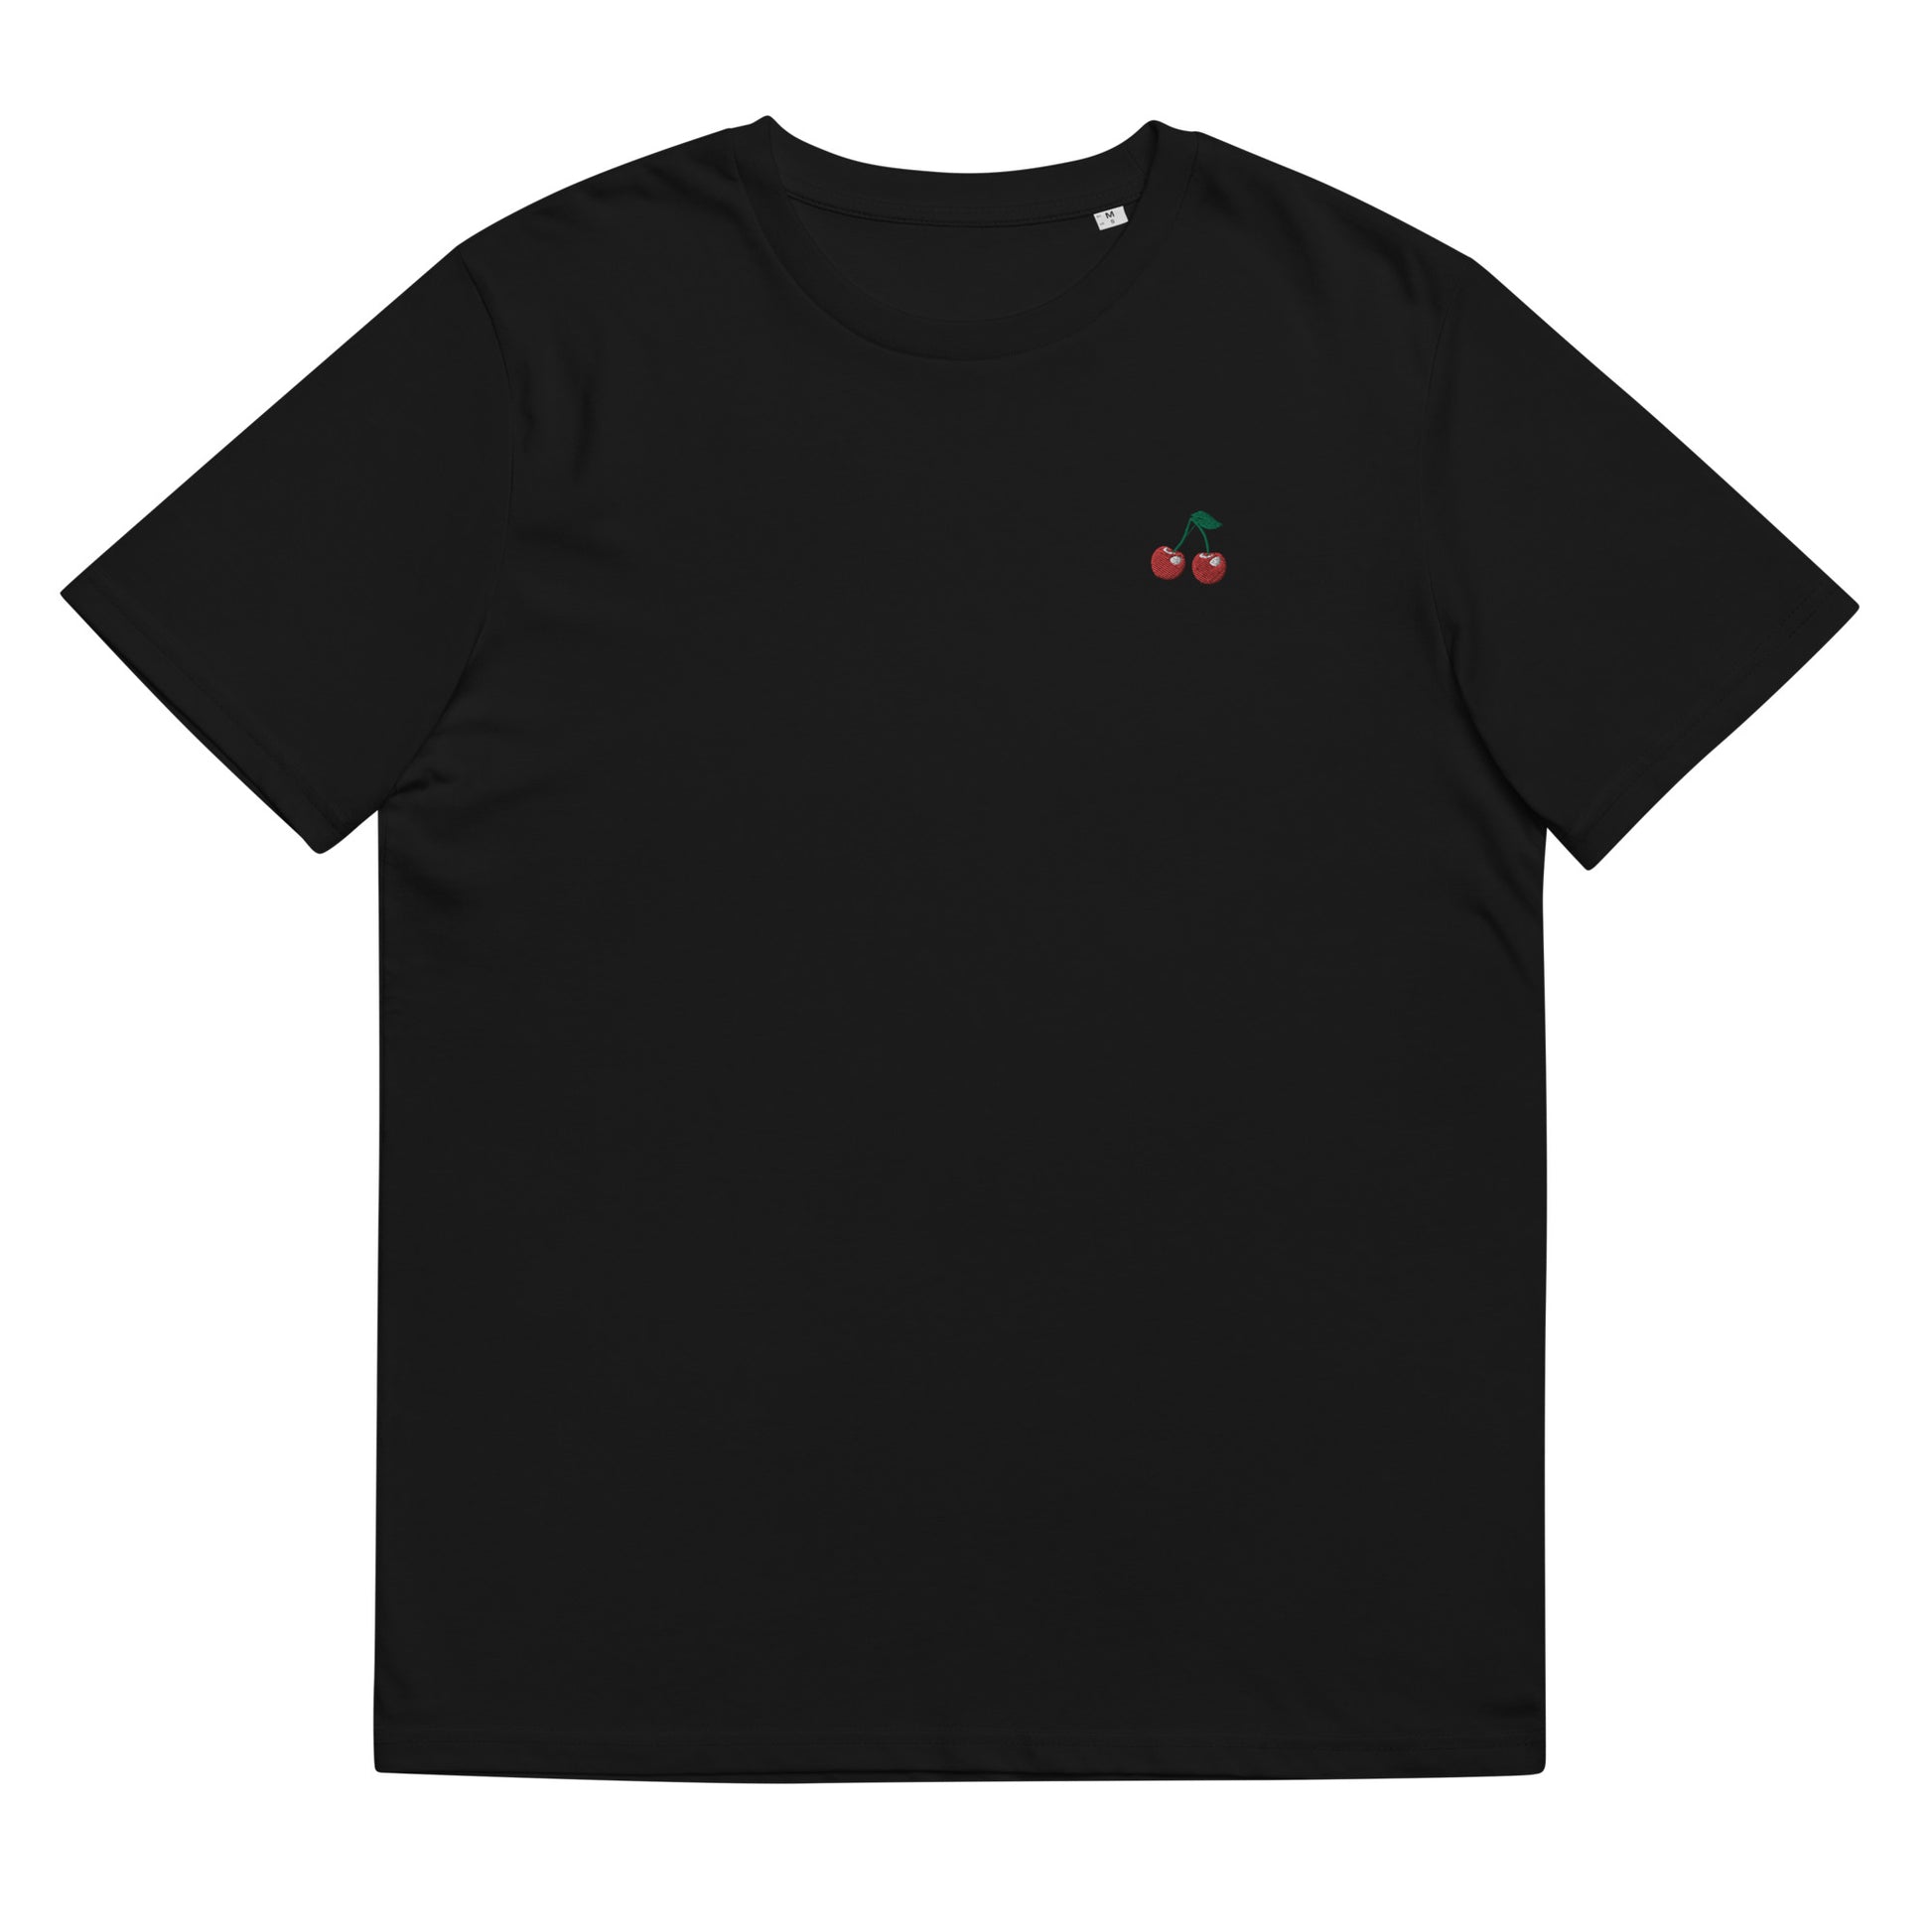 Fitted black organic cotton t-shirt with small embroidered red cherries on the left chest. Available in sizes S to 3XL.